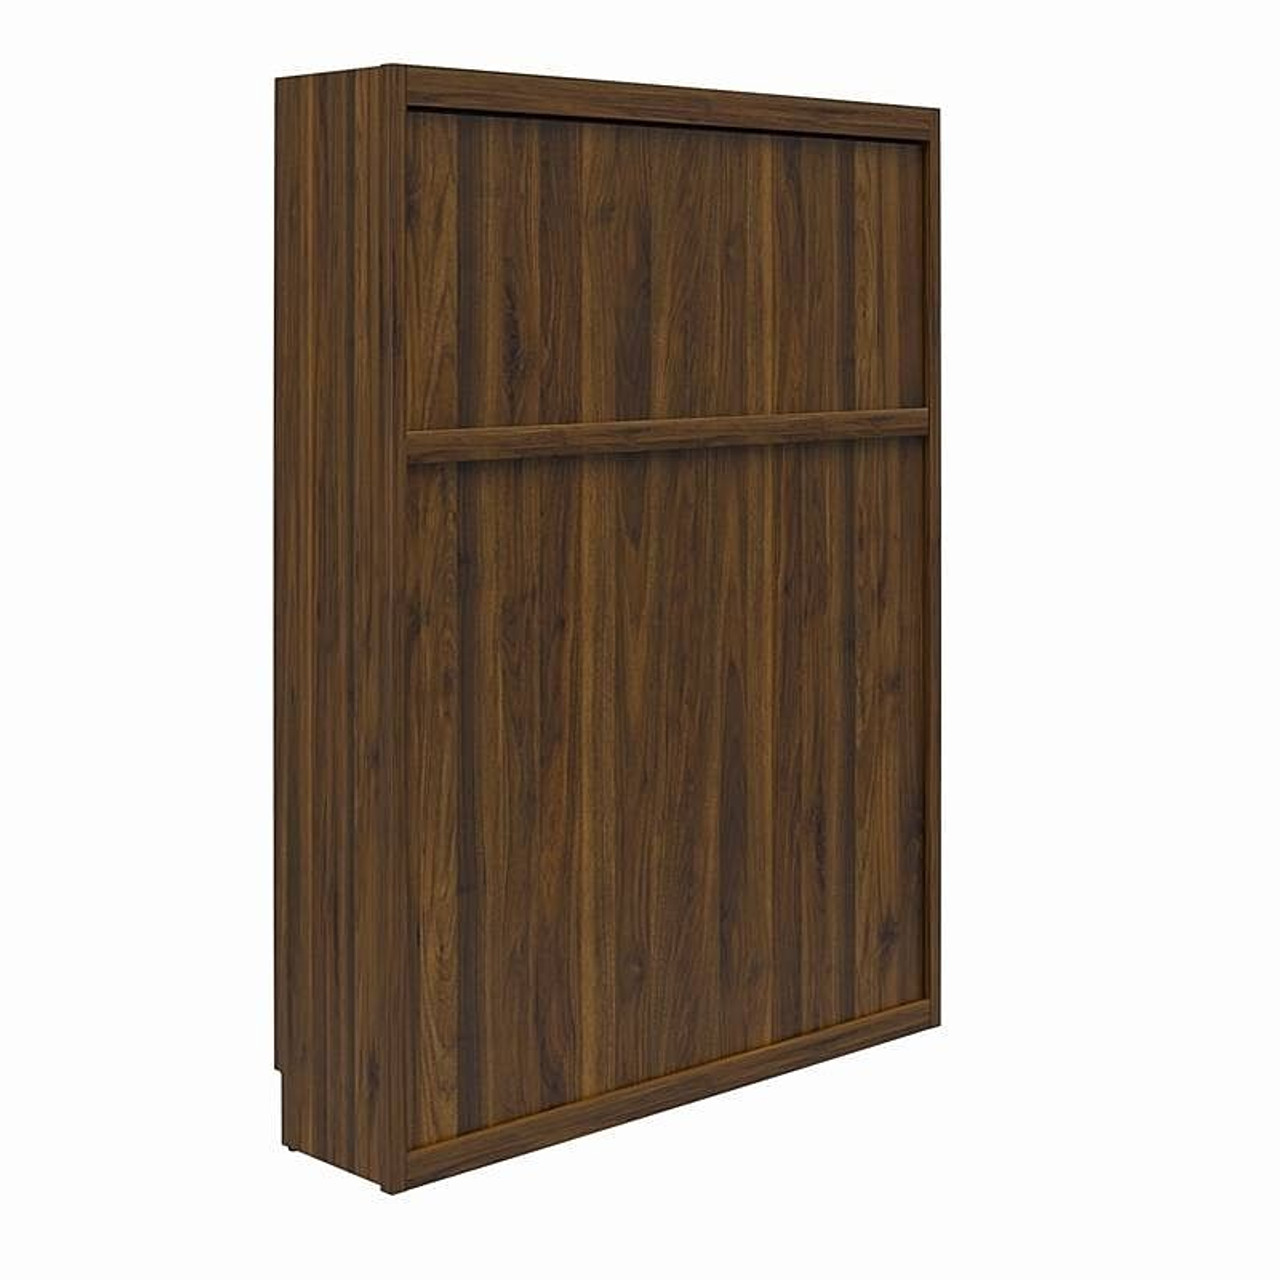 Queen size Murphy Bed Space Saving Wall Mounted Design in Walnut Finish